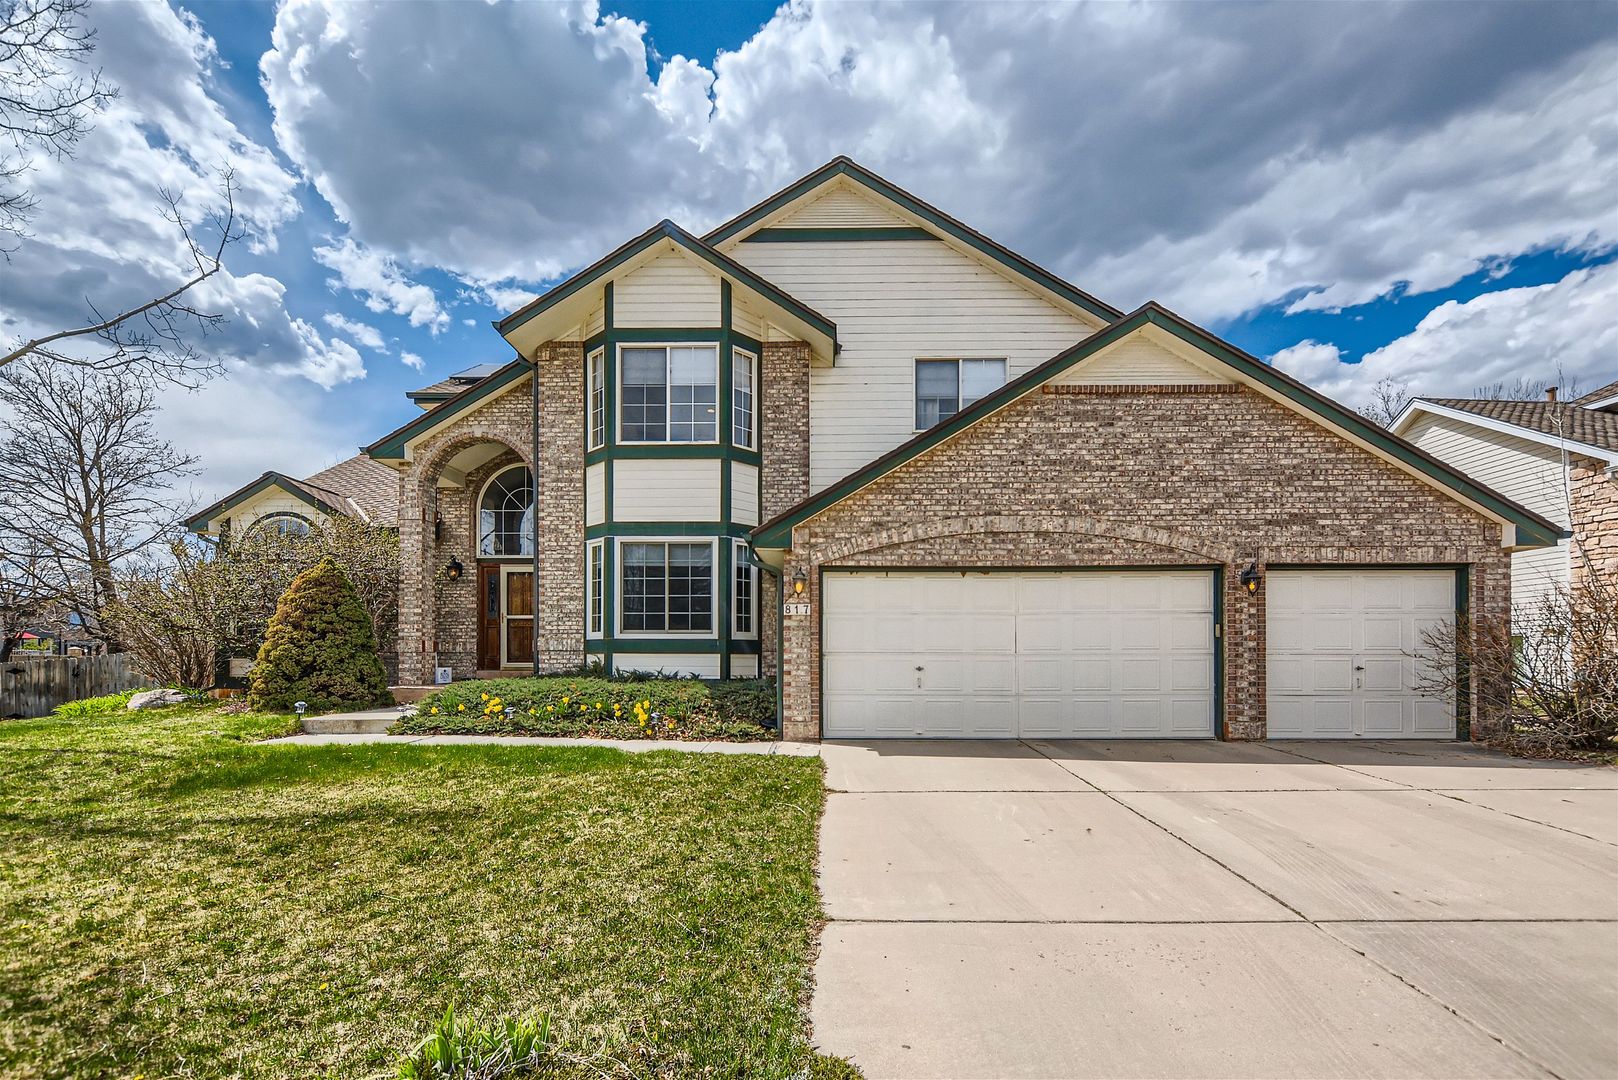 Spacious Haven: 4 BDR Home in Louisville, CO